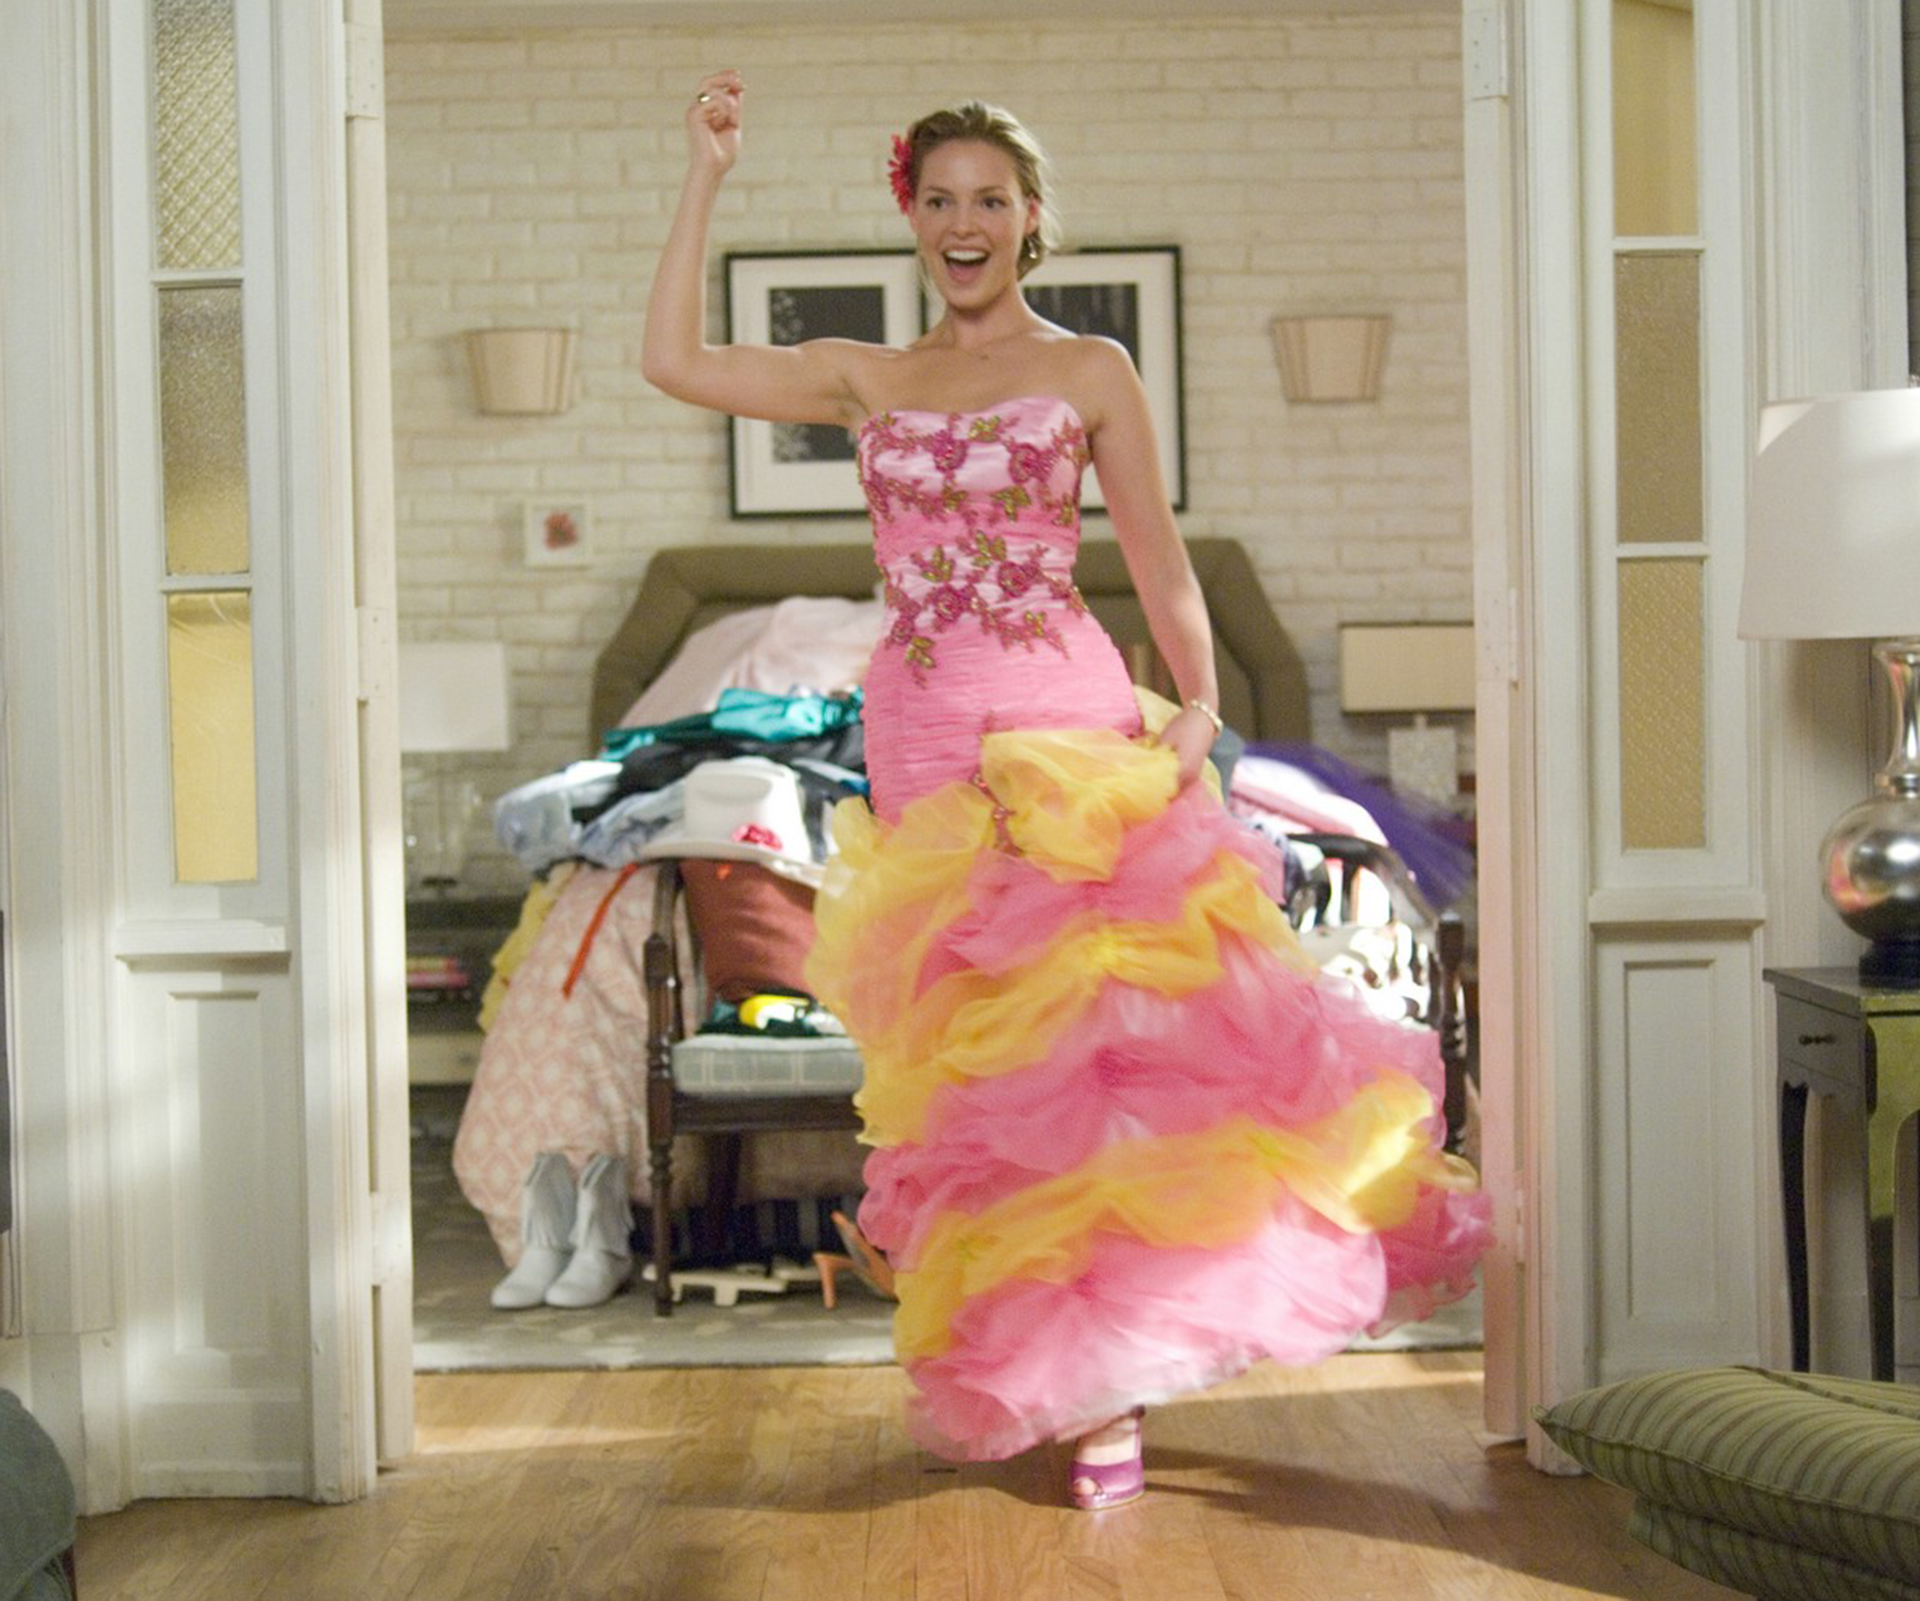 Katherine Heigl was a bridesmaid and never a bride in the 2008 rom-com 27 Dresses.